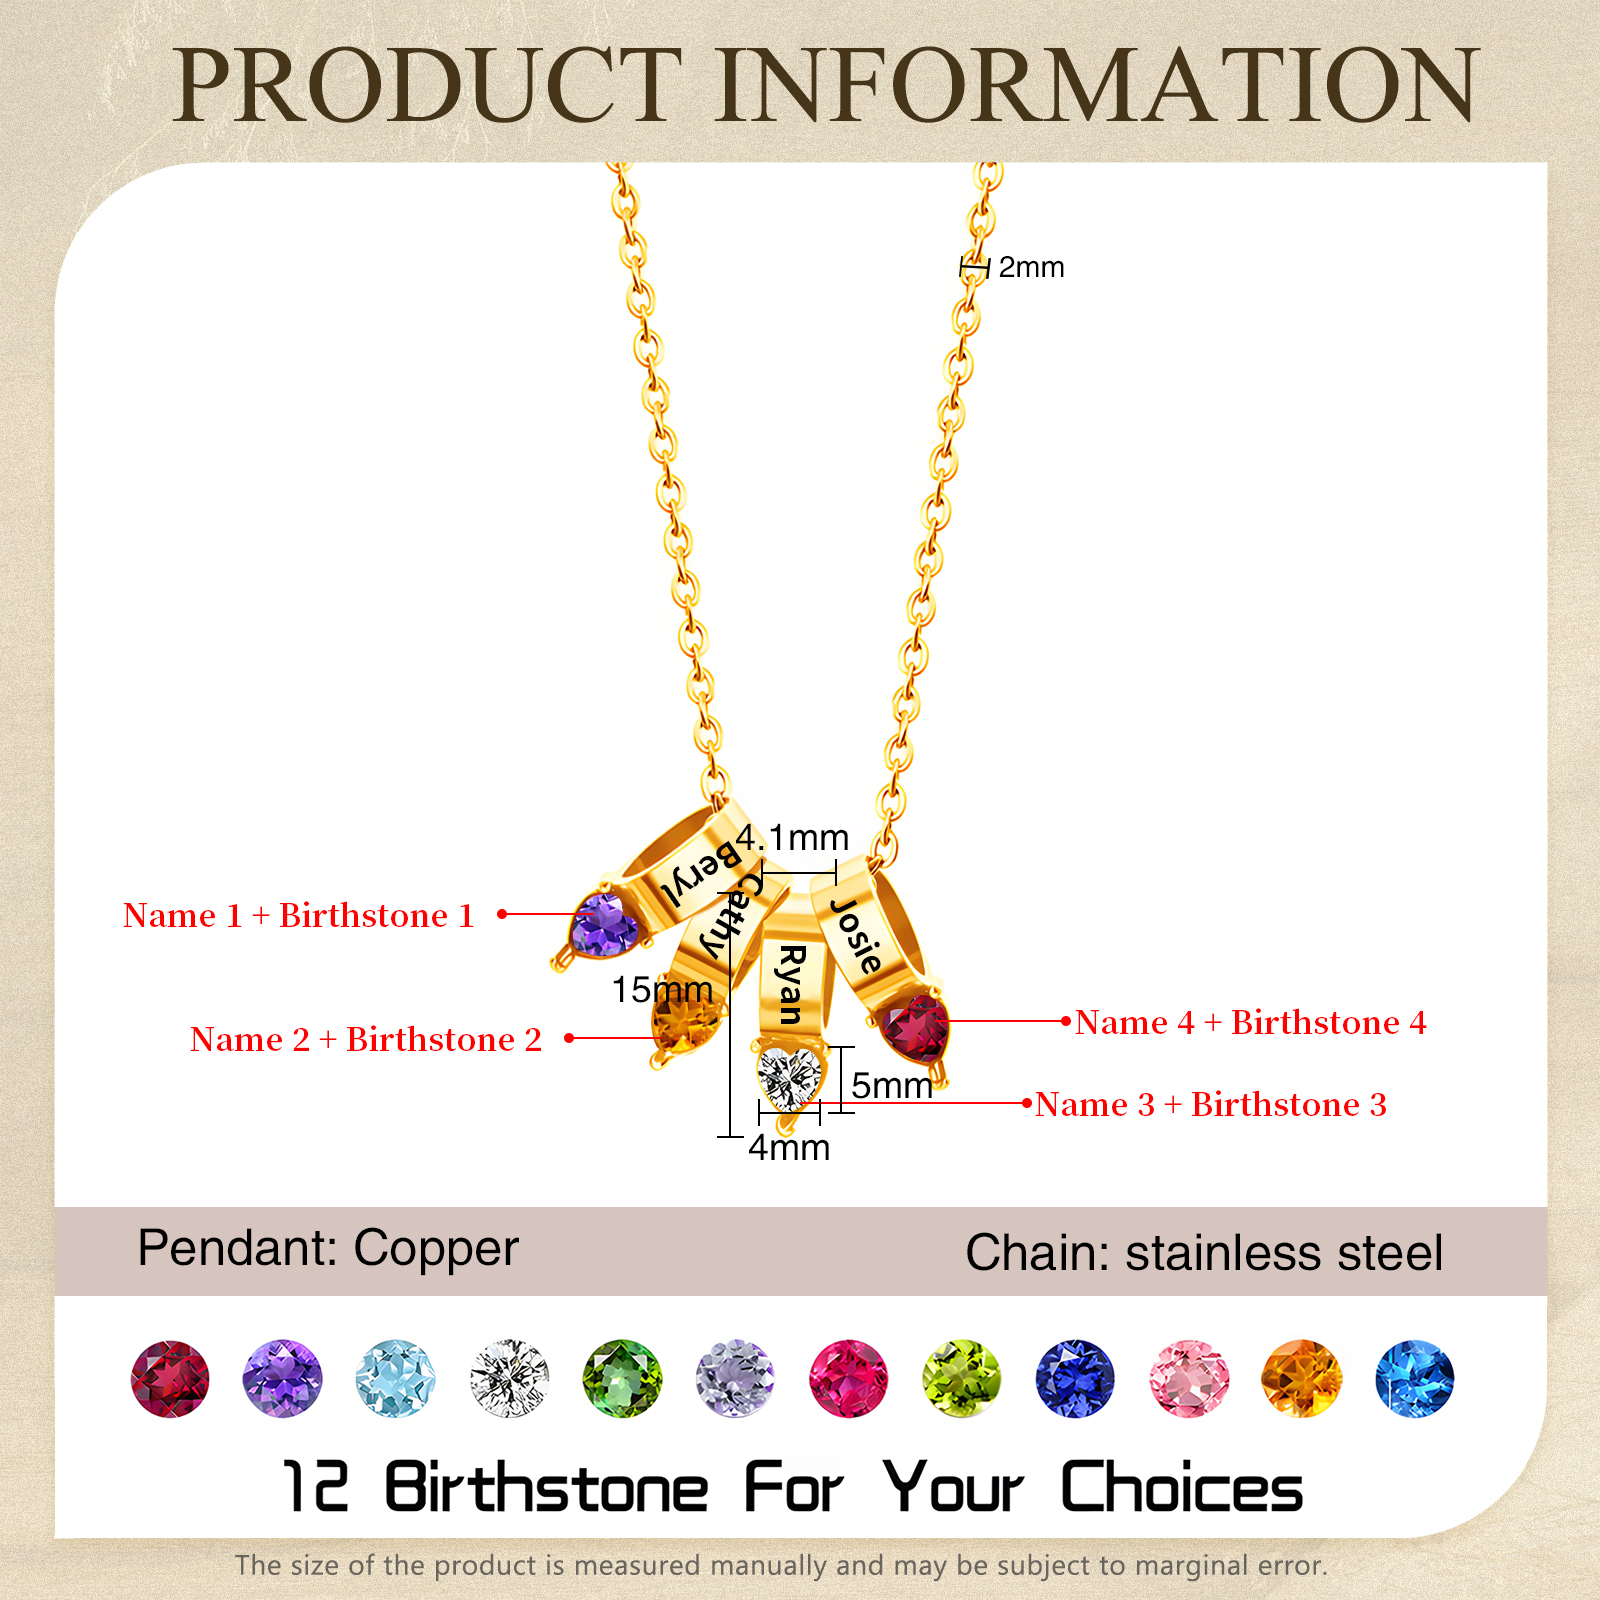 4 Names - Personalized Link Pendant Necklace with Customized Name and Birthstone Gift for Her